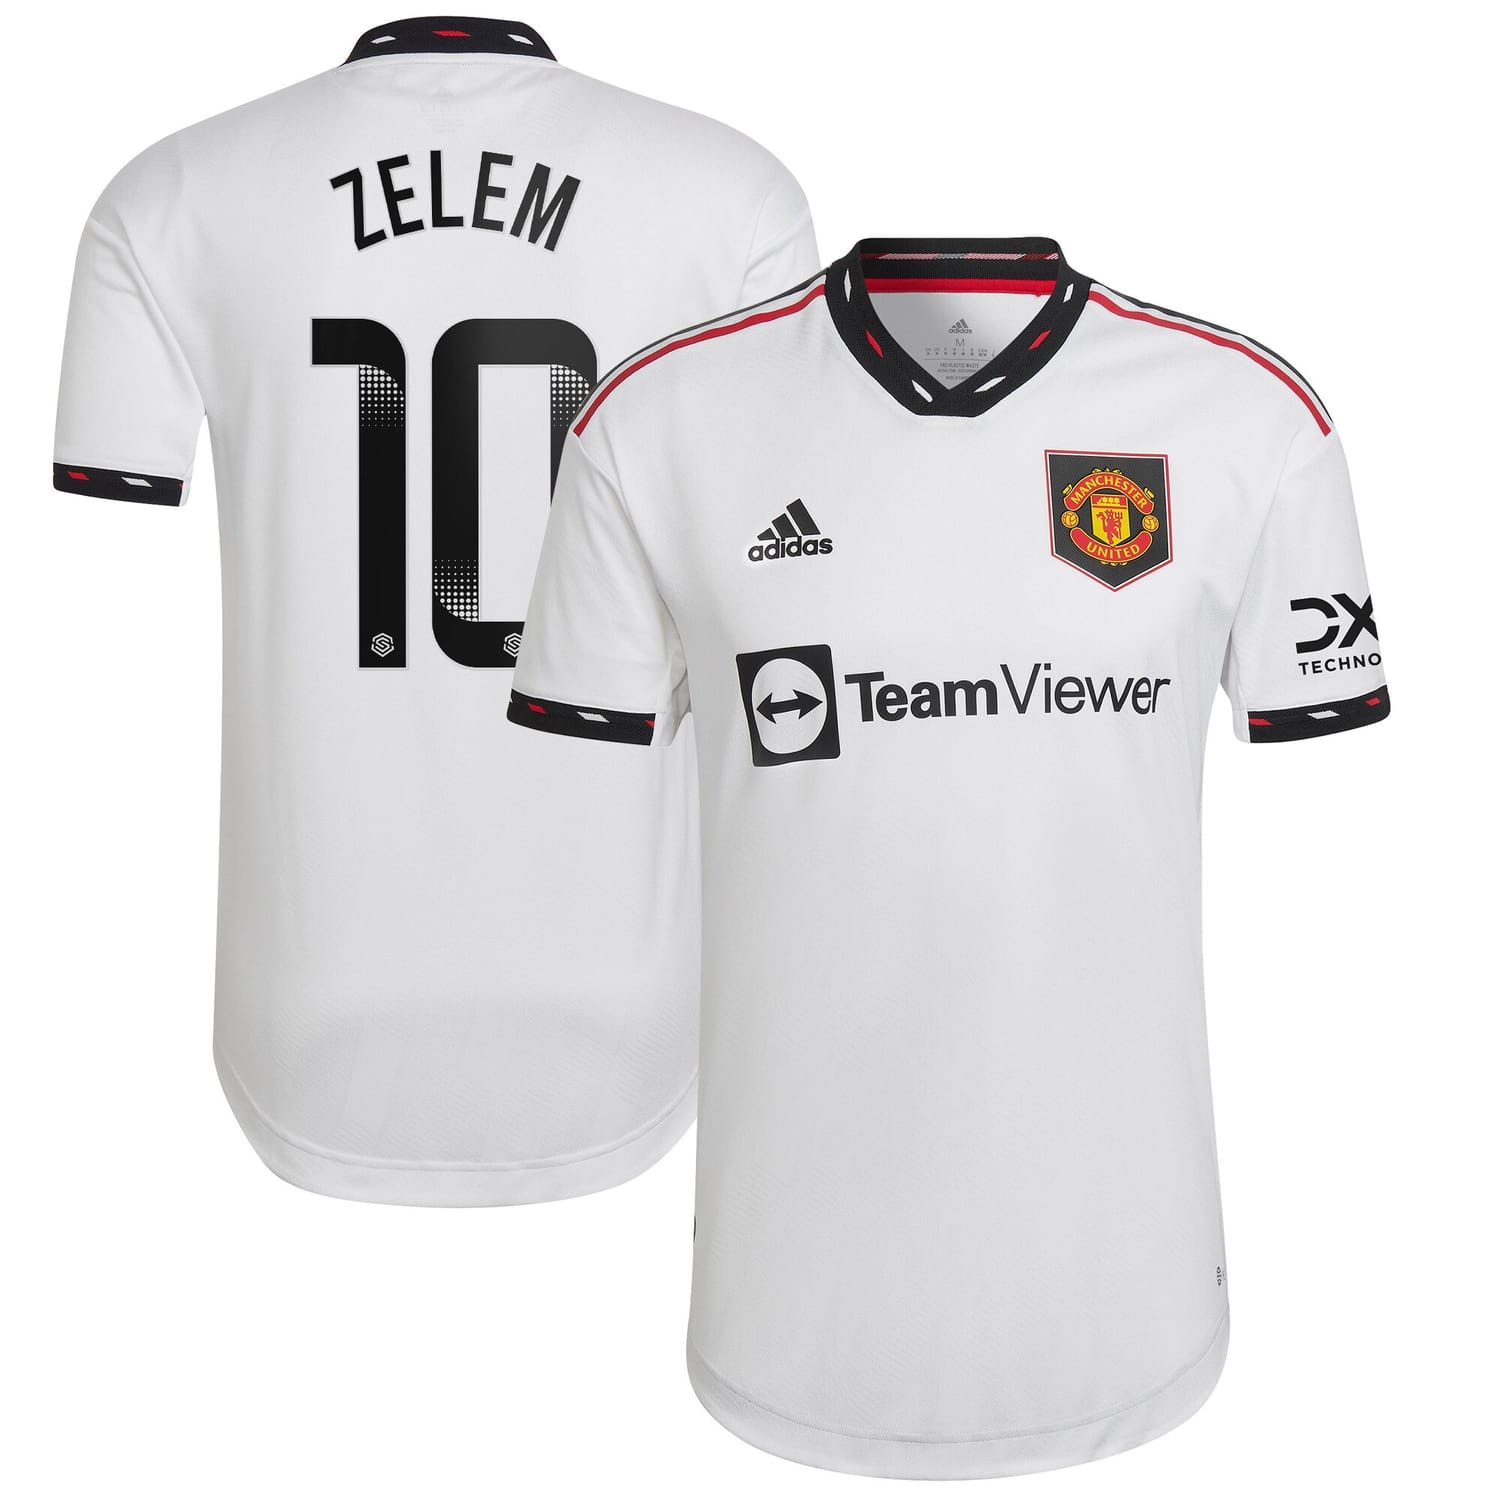 Premier League Manchester United Away WSL Authentic Jersey Shirt 2022-23 player Katie Zelem 10 printing for Men